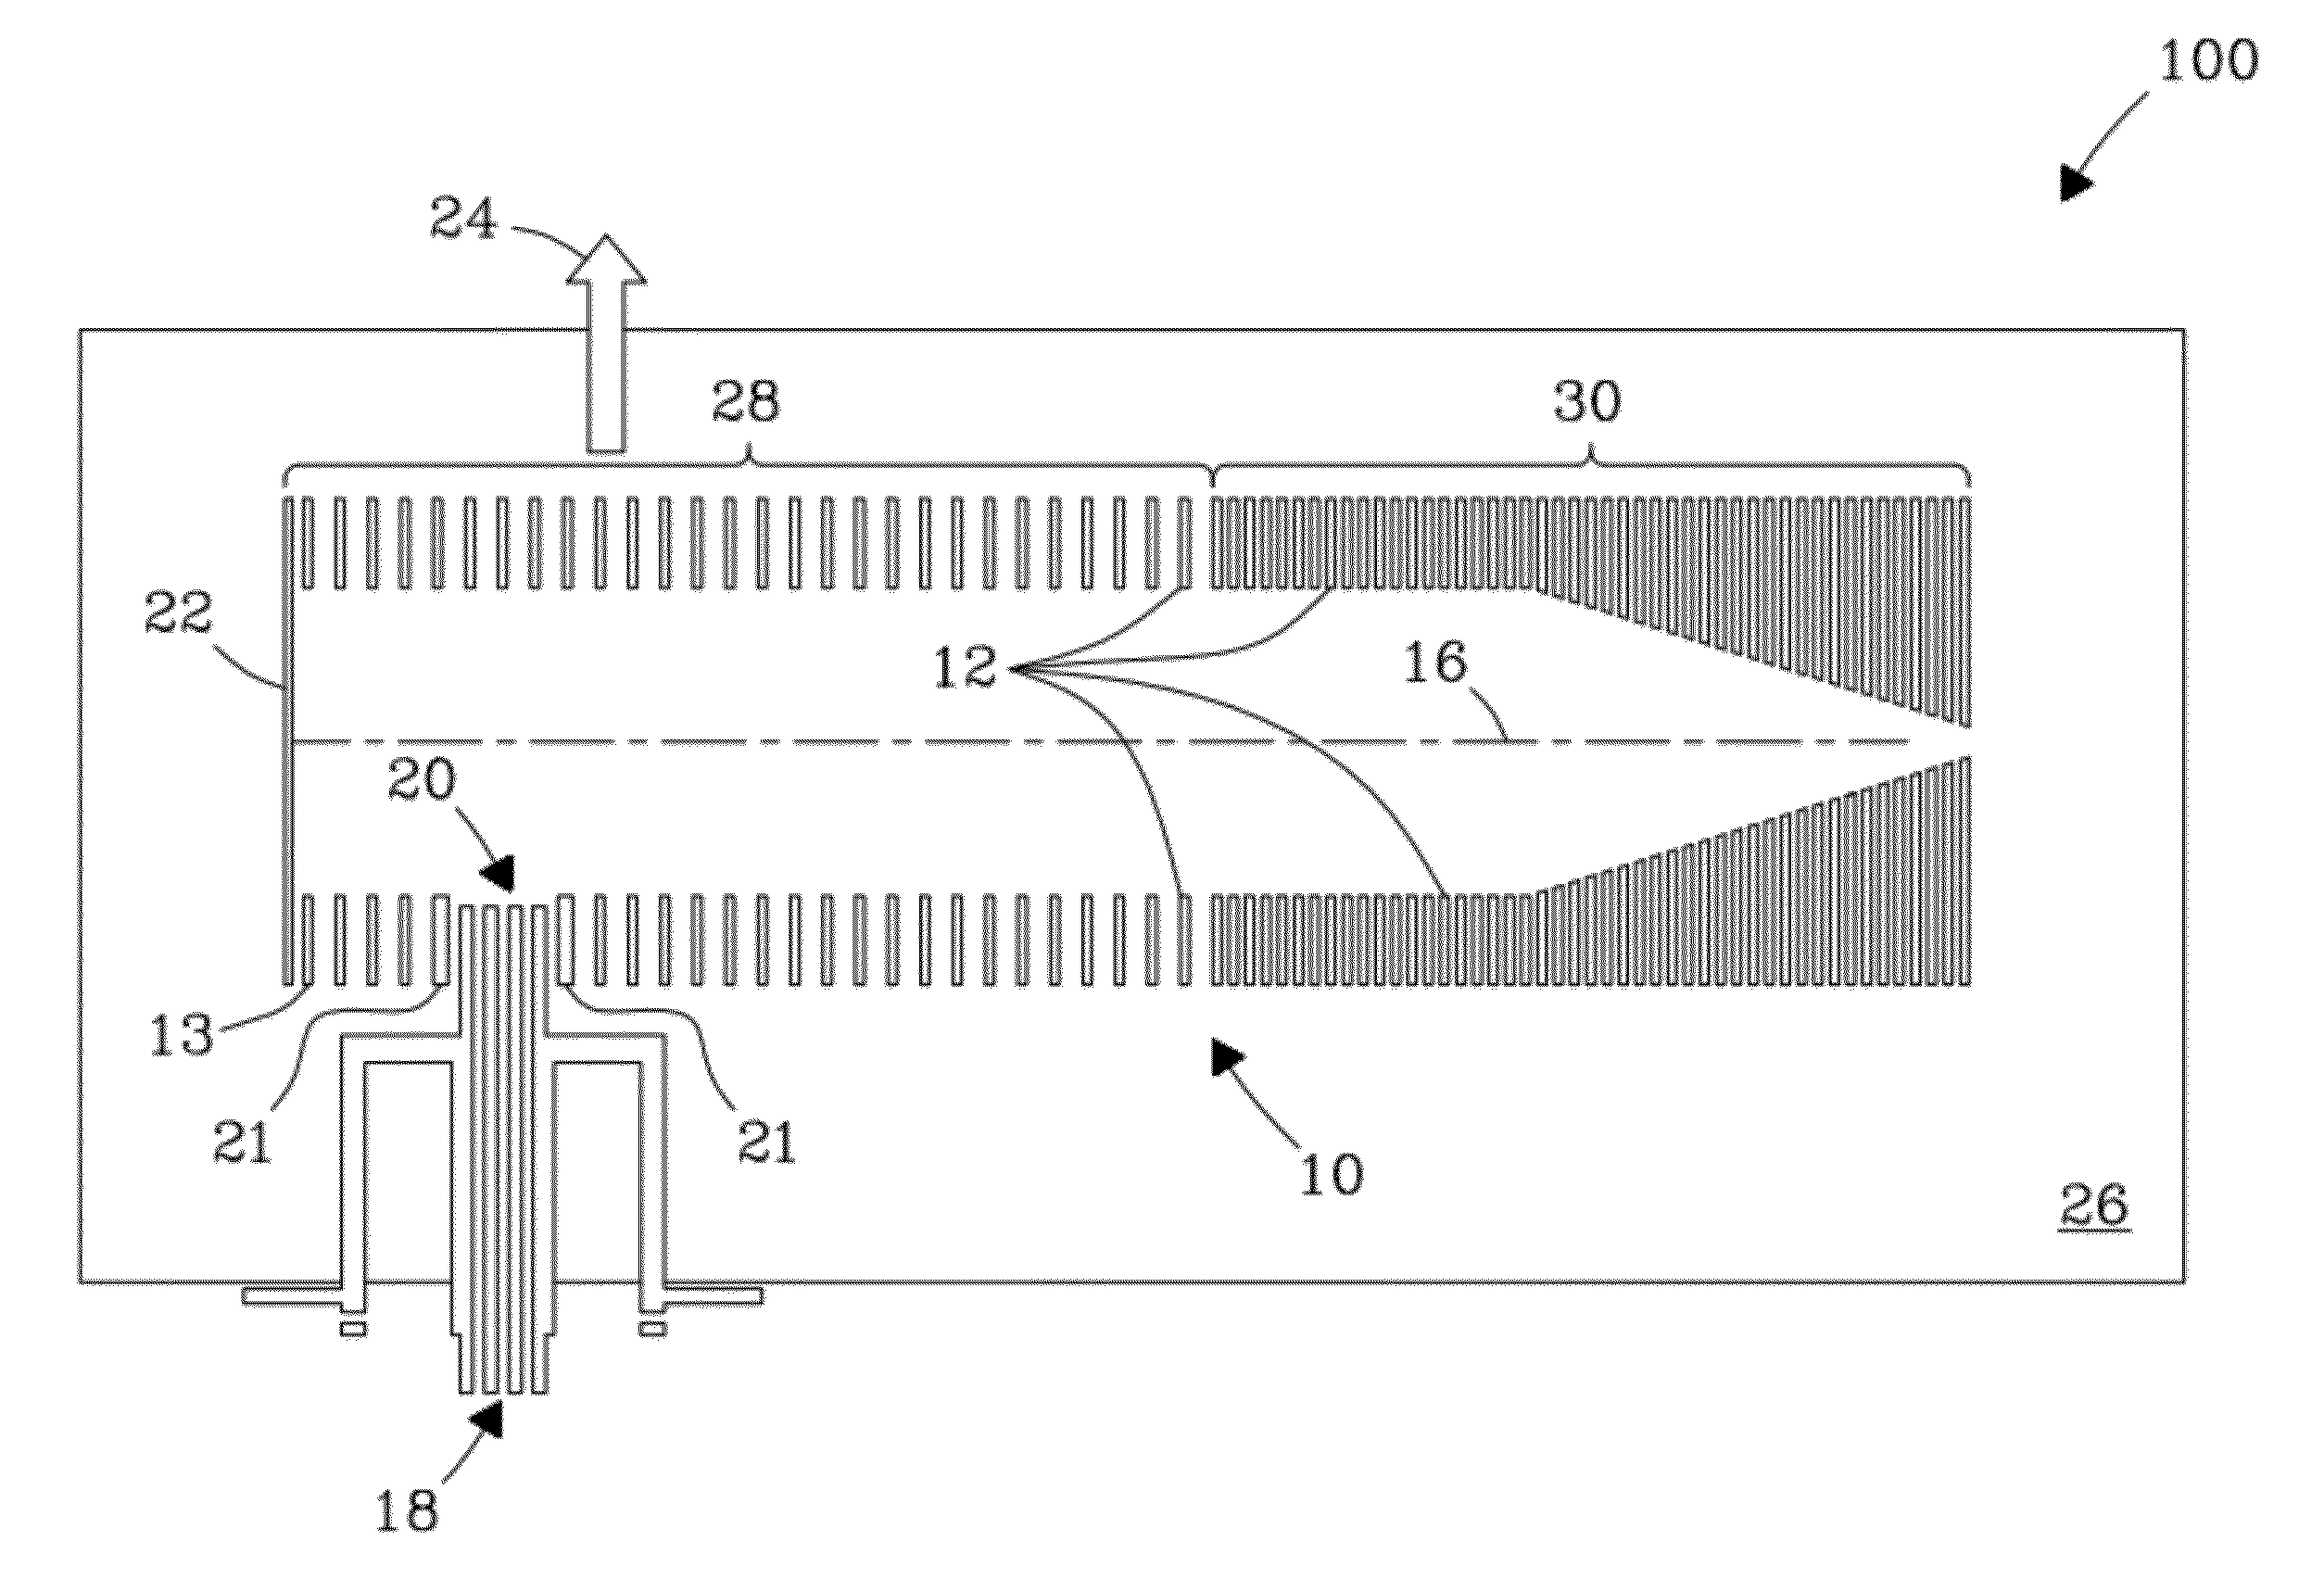 Orthogonal ion injection apparatus and process